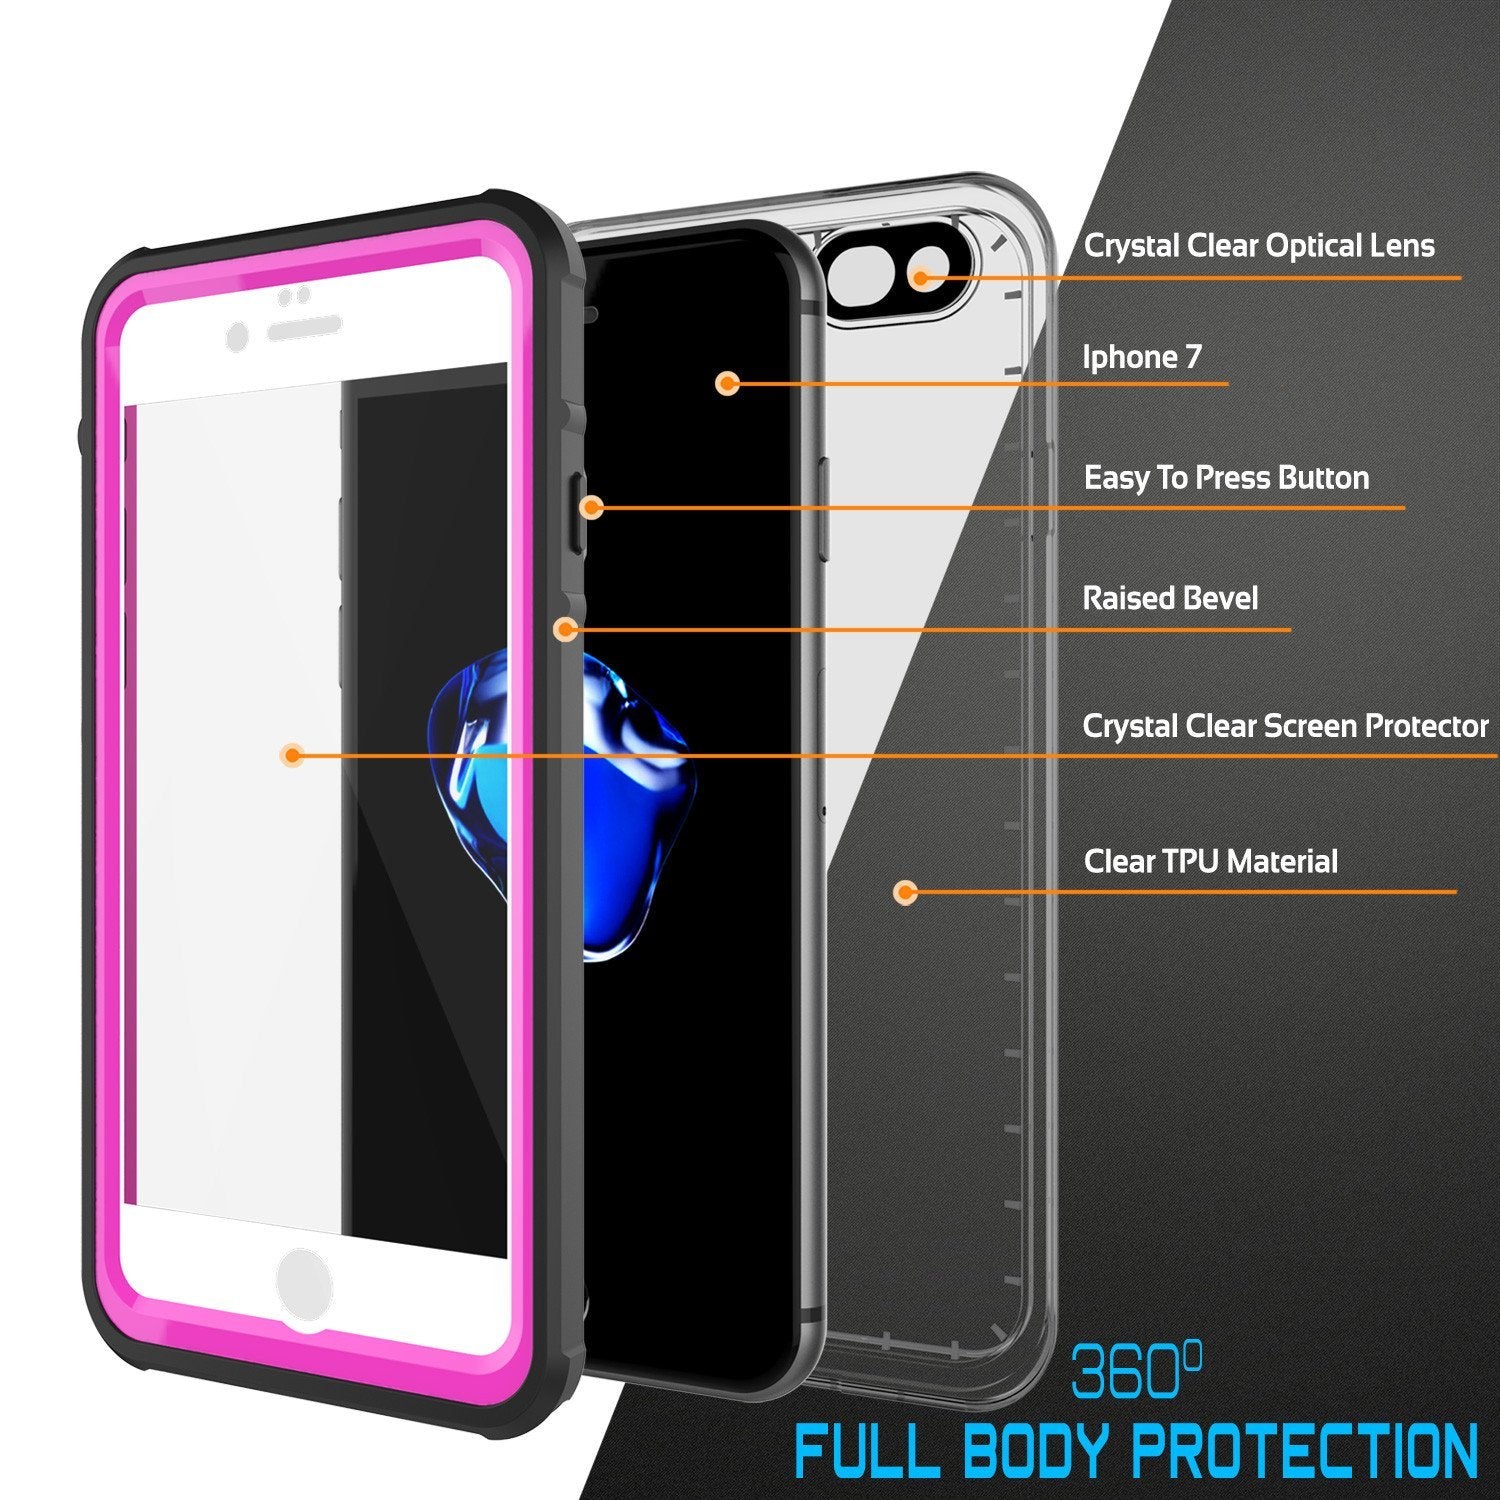 Apple iPhone 8 Waterproof Case, PUNKcase CRYSTAL Pink W/ Attached Screen Protector  | Warranty - PunkCase NZ